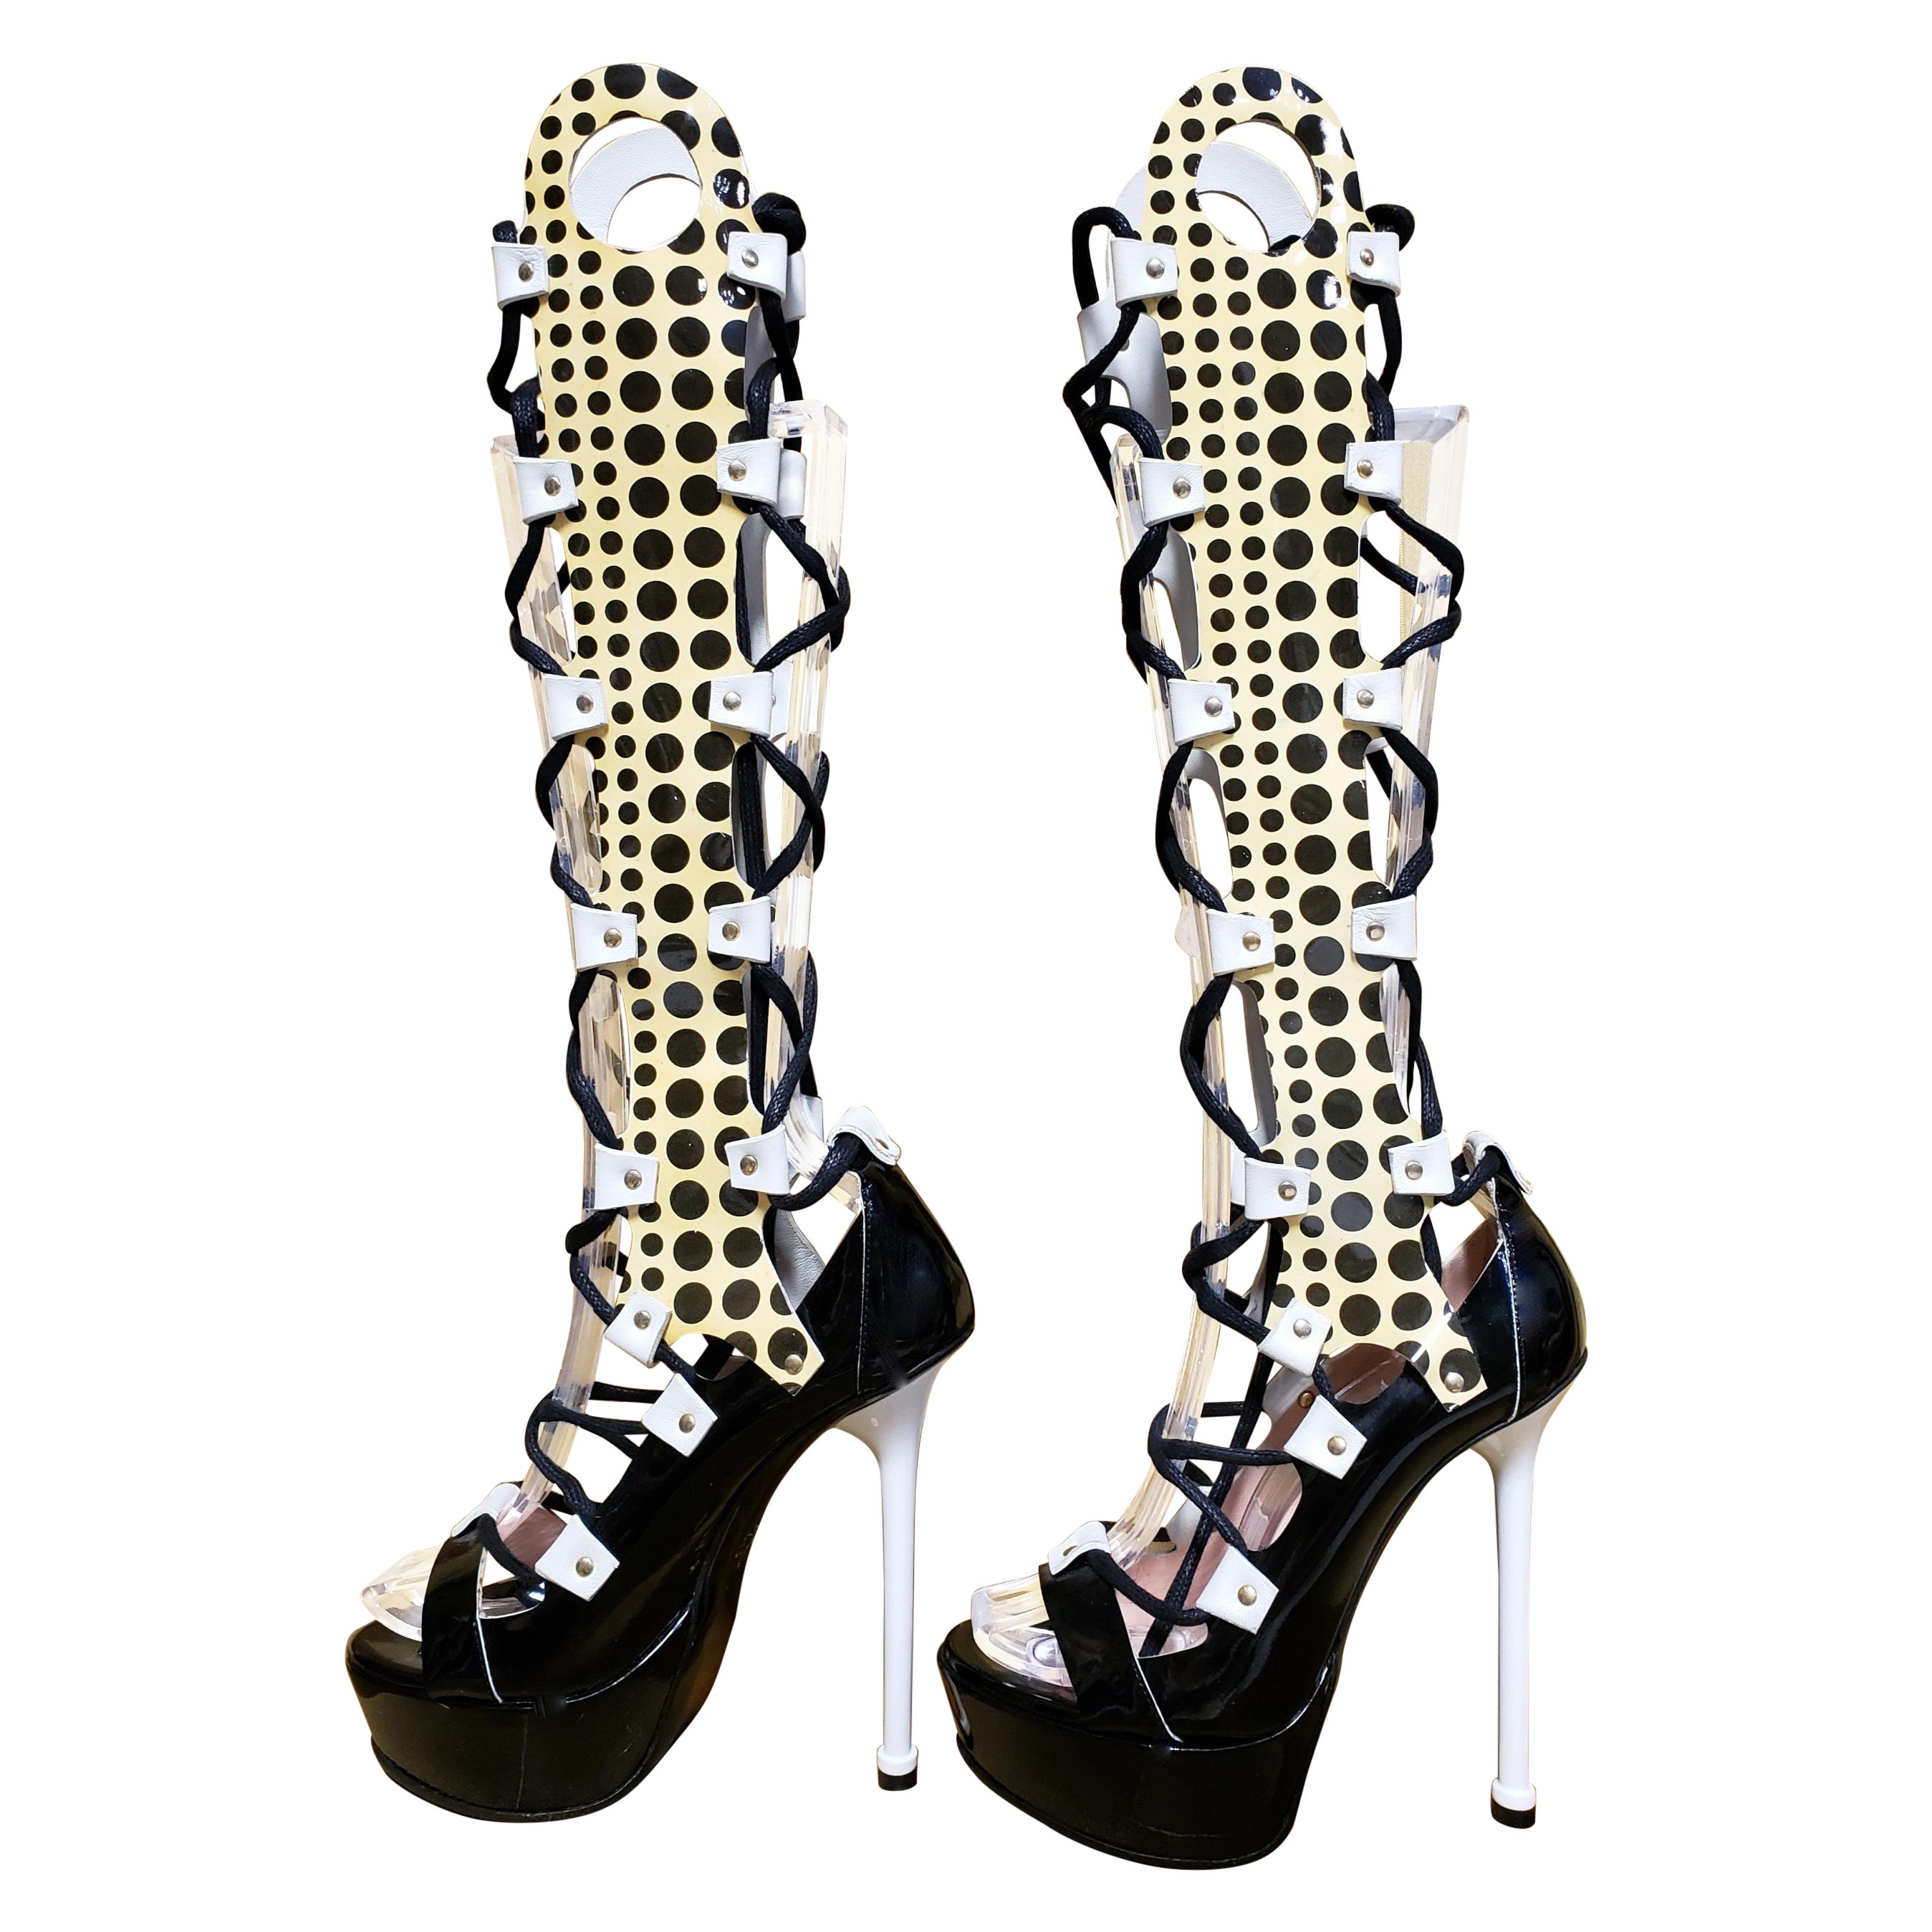 Resort 2011 NEW VERSACE LACE UP PATENT LEATHER PLATFORM SANDAL BOOTS 36 - 6 For Sale